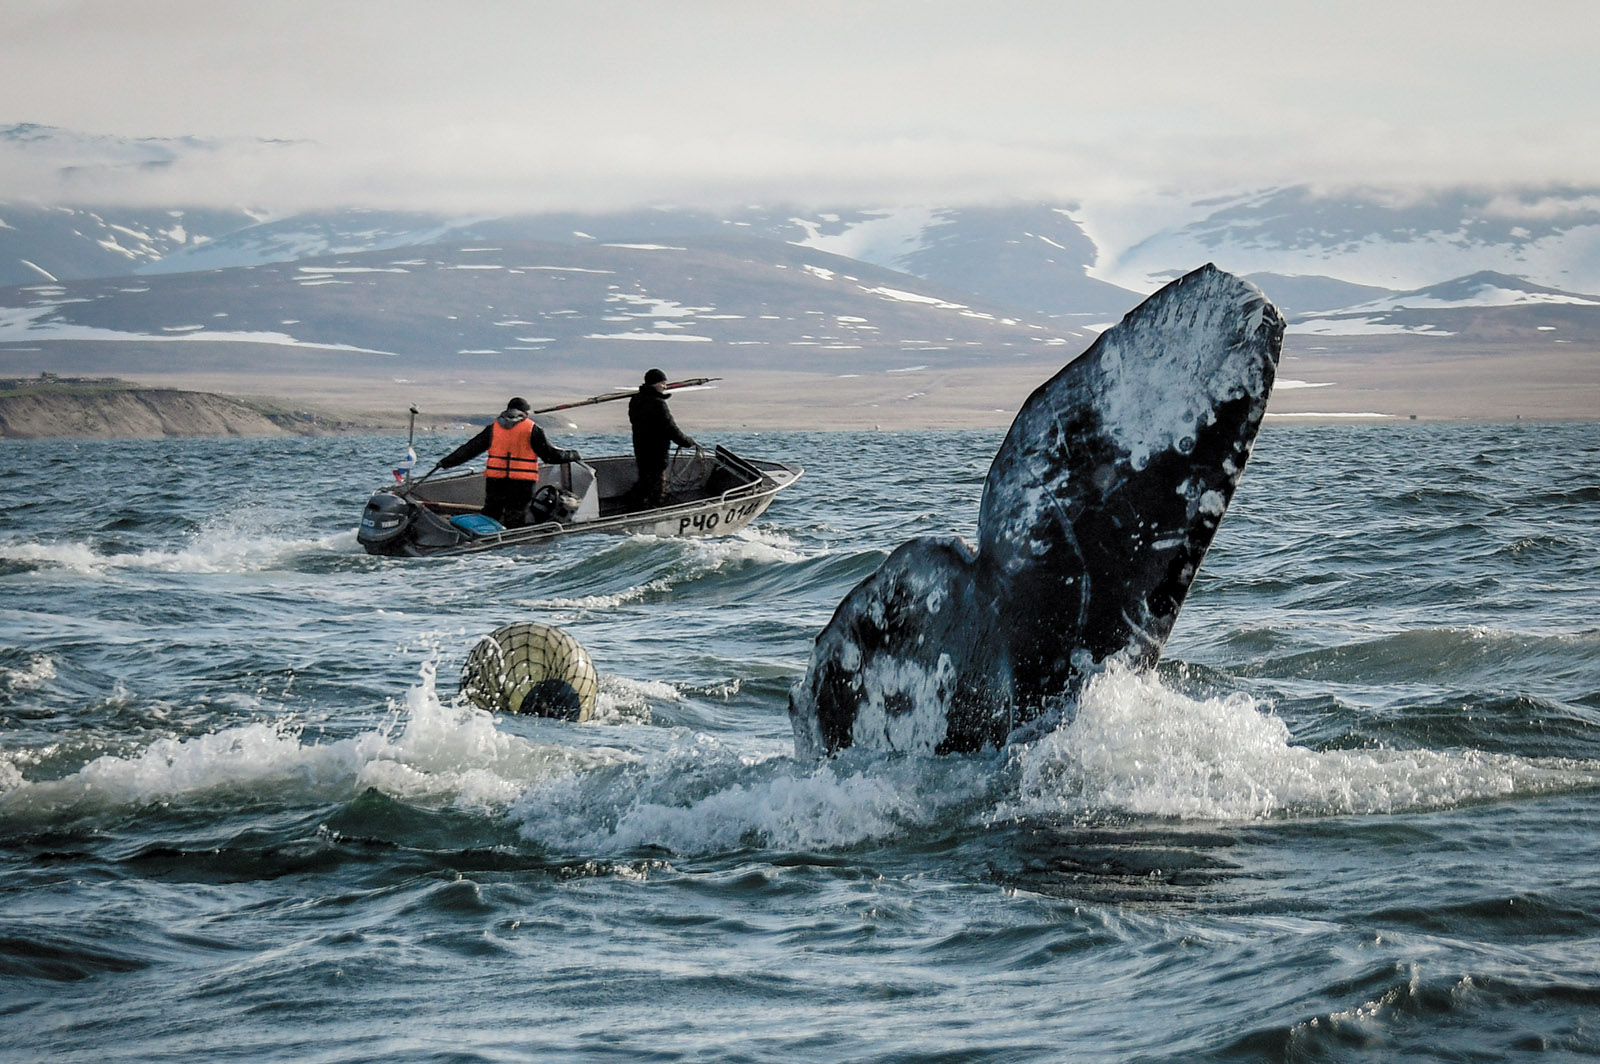 Chukchi hunting a gray whale in the Bering Sea, Chukotka, Russia, June 2018